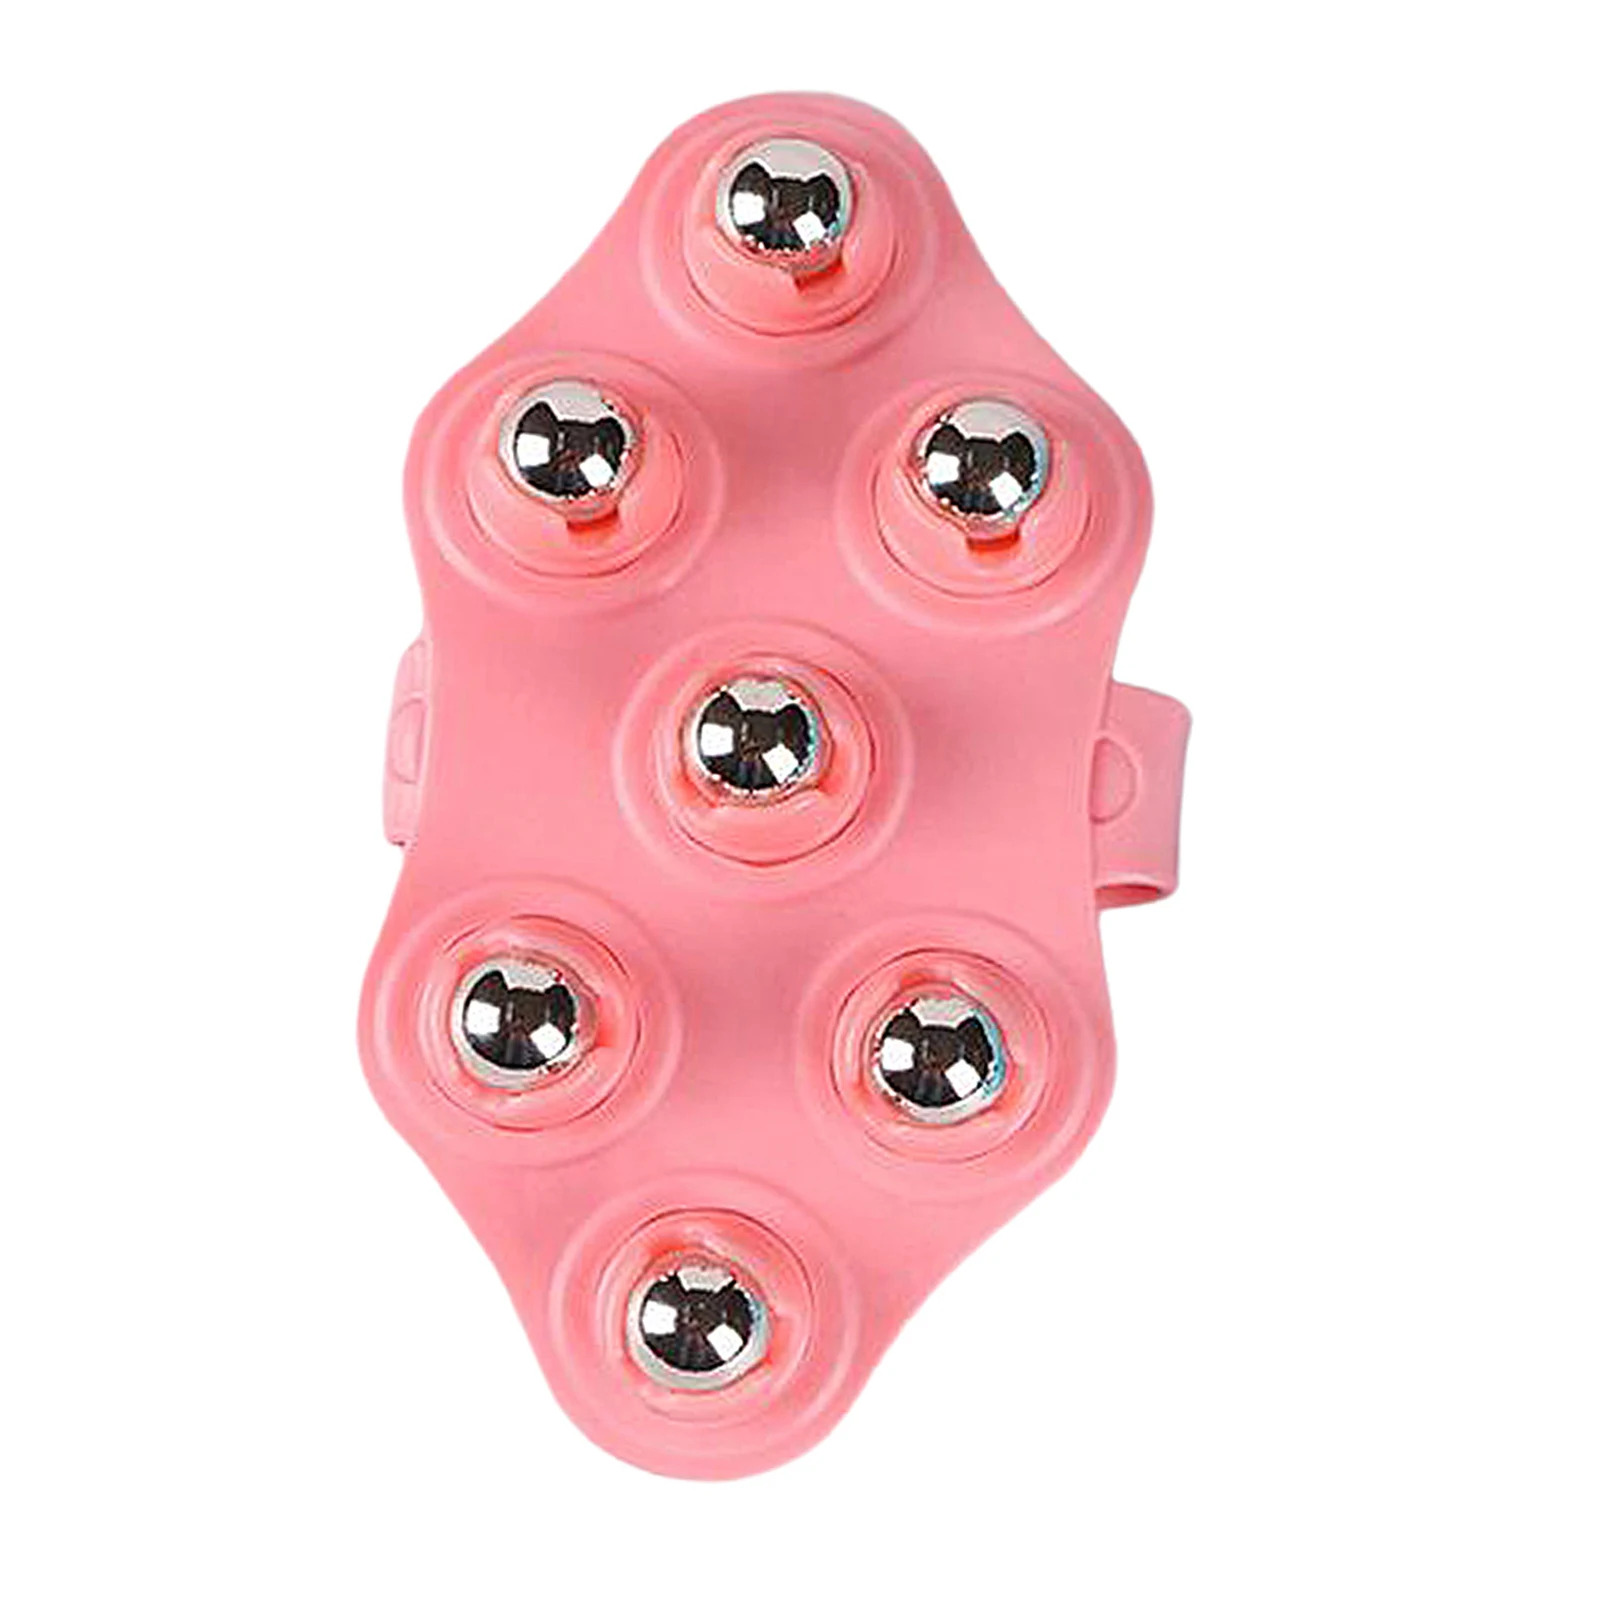 7 Ball Palm Shaped Lymphatic Hand Held Massager with Magnetic for Neck Roller Ball Massage Stress Relief Muscle Roller